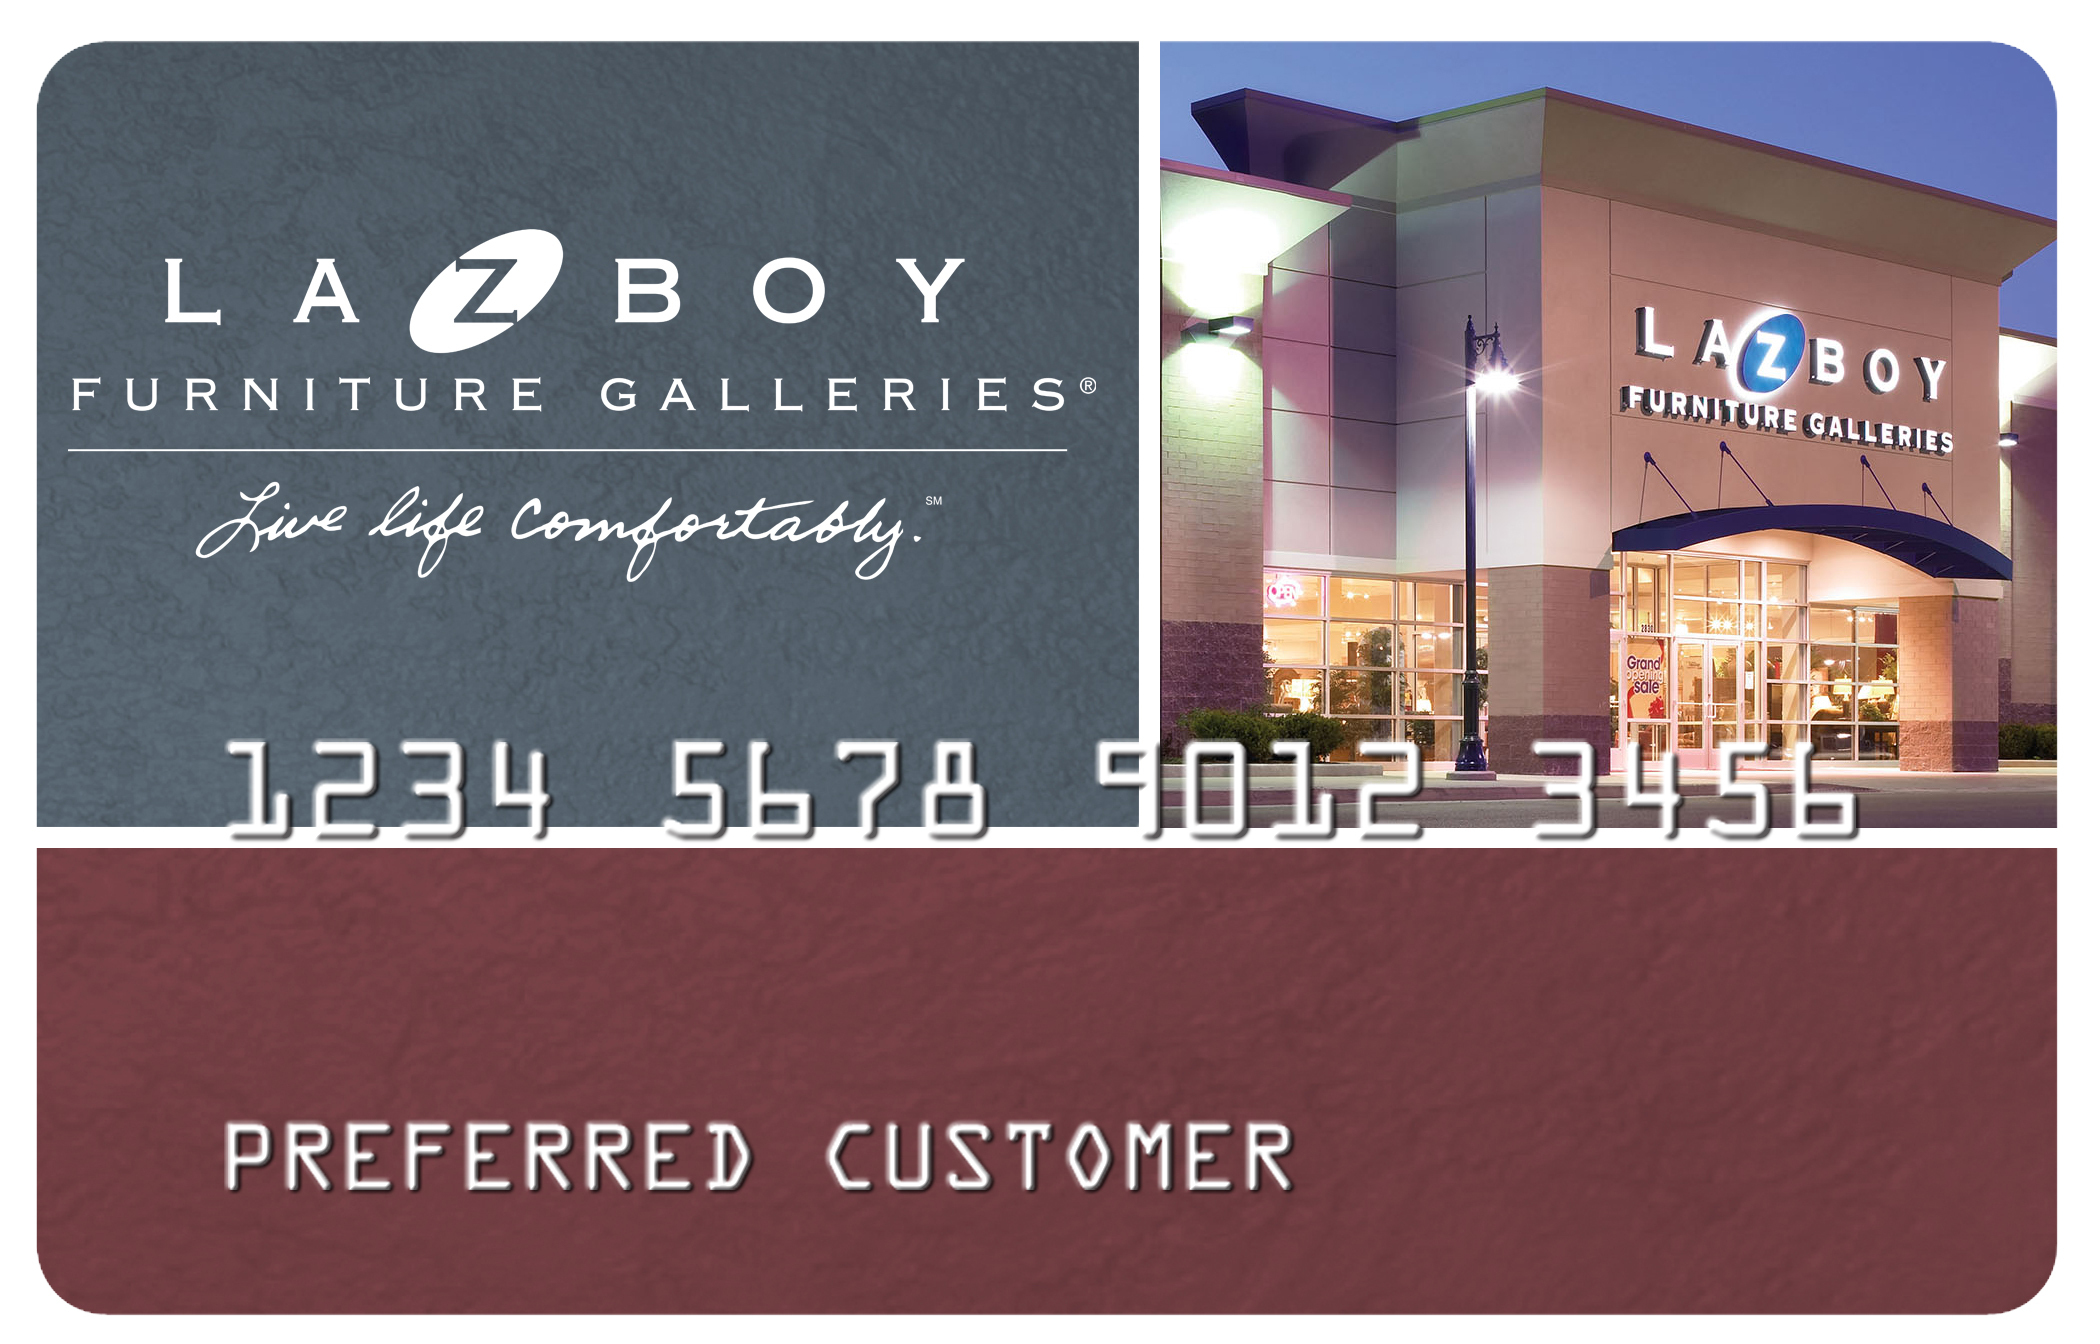 Synchrony Financial And La Z Boy Extend Consumer Credit Card